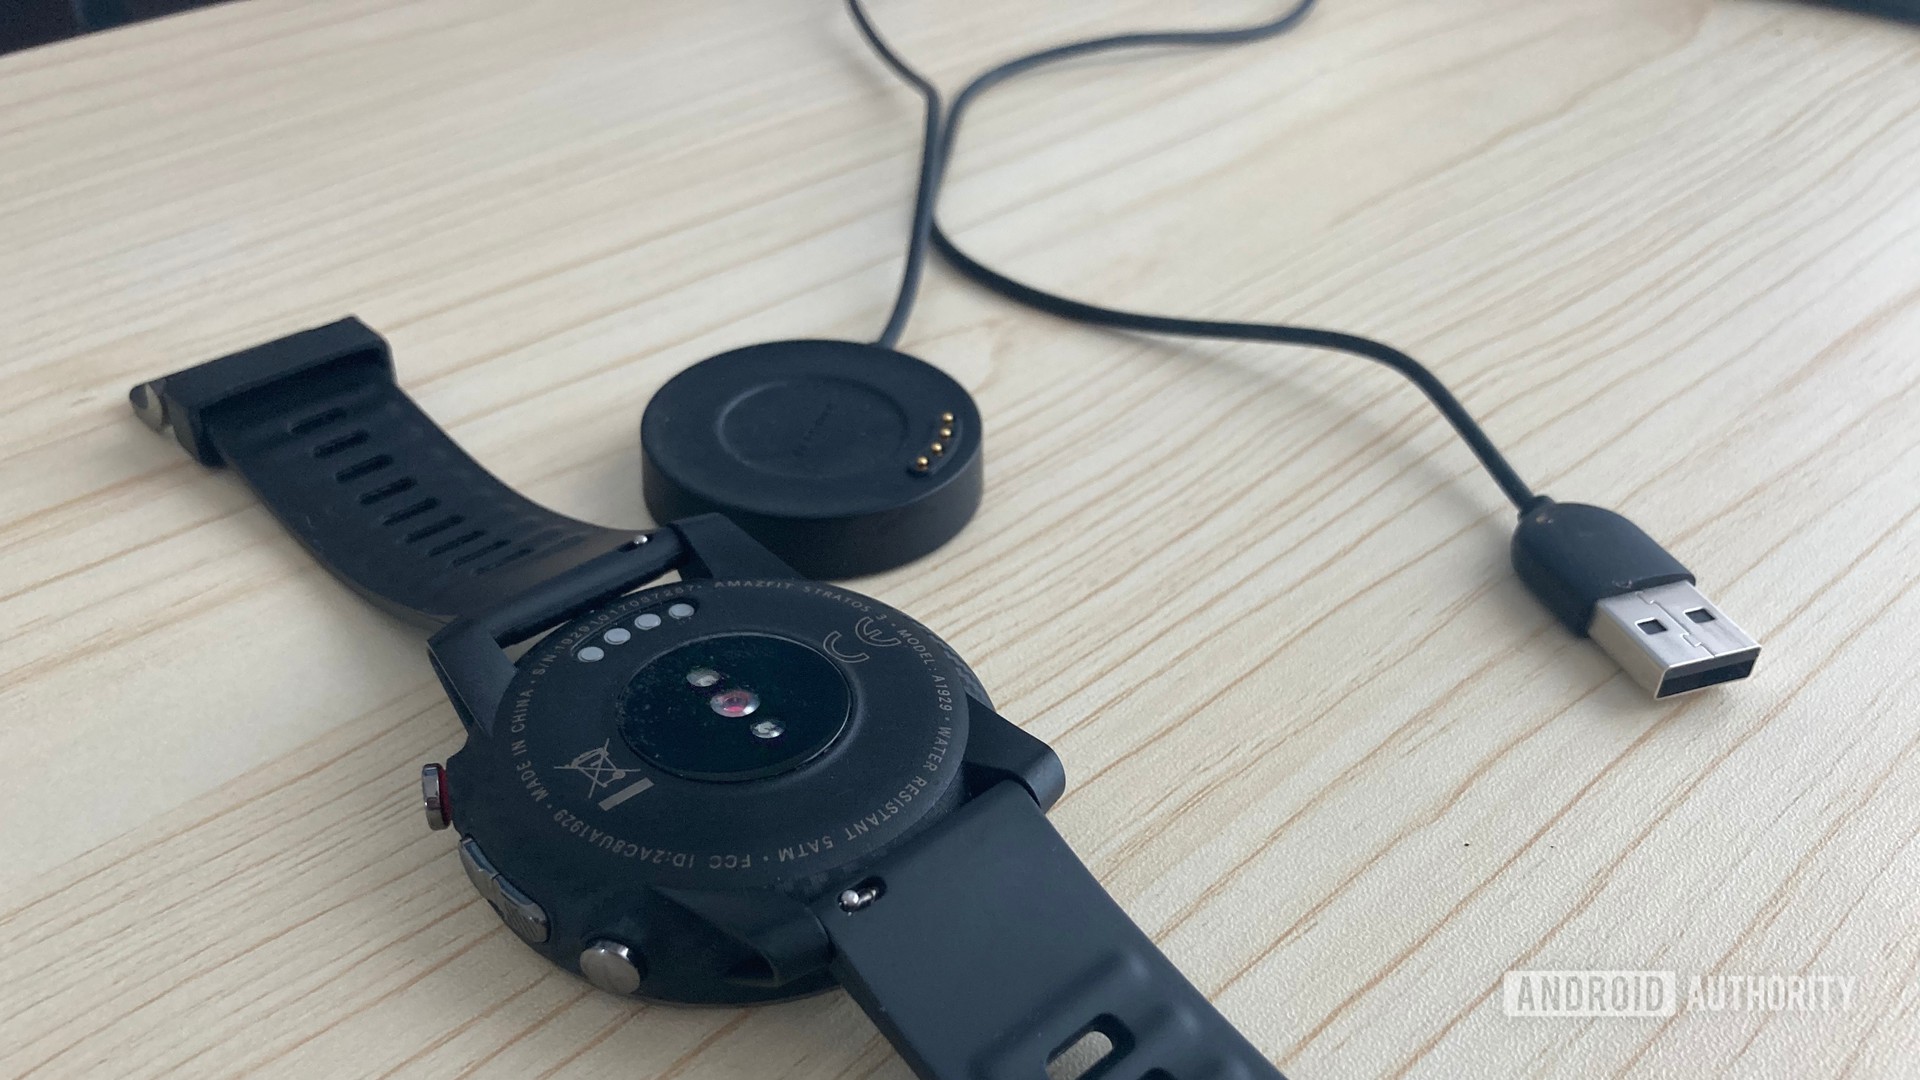 The Amazfit Stratos 3 photographed alongside its charger